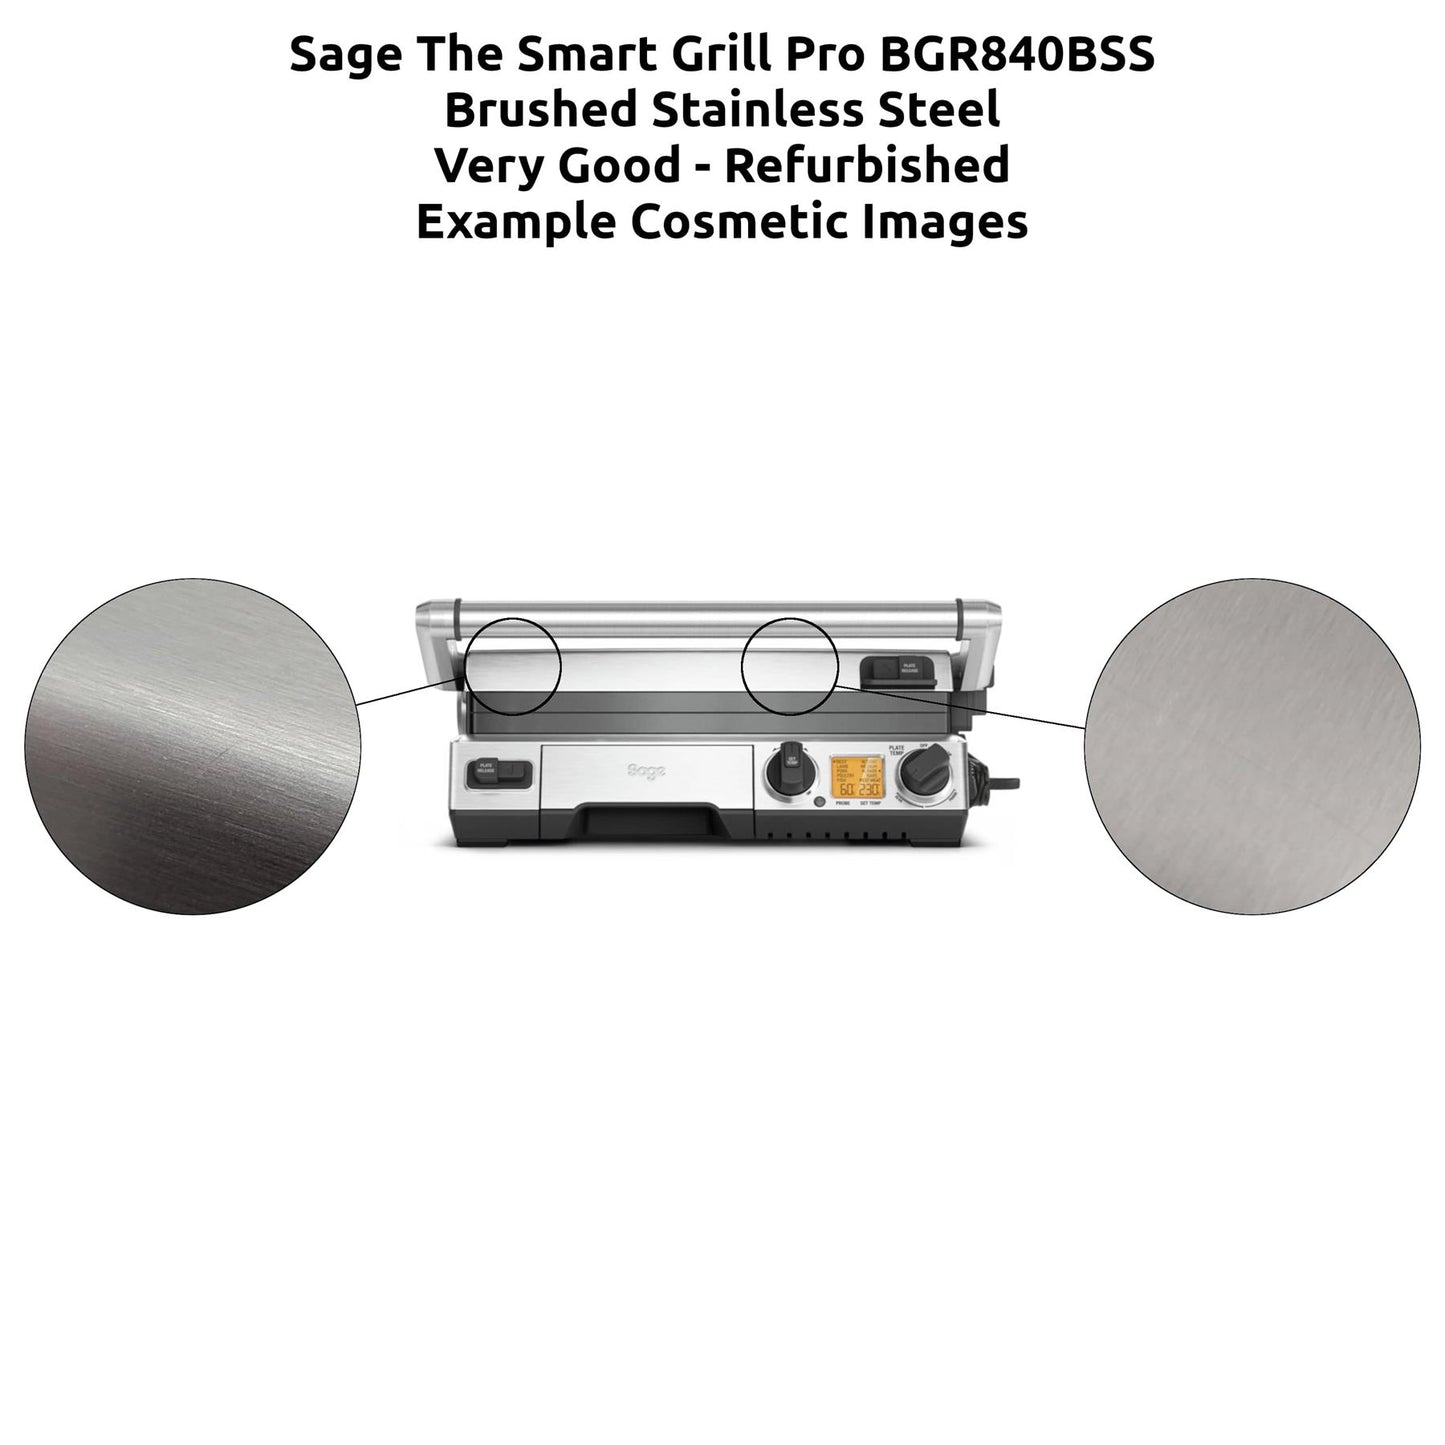 Sage The Smart Grill Pro BGR840 Electric Grill